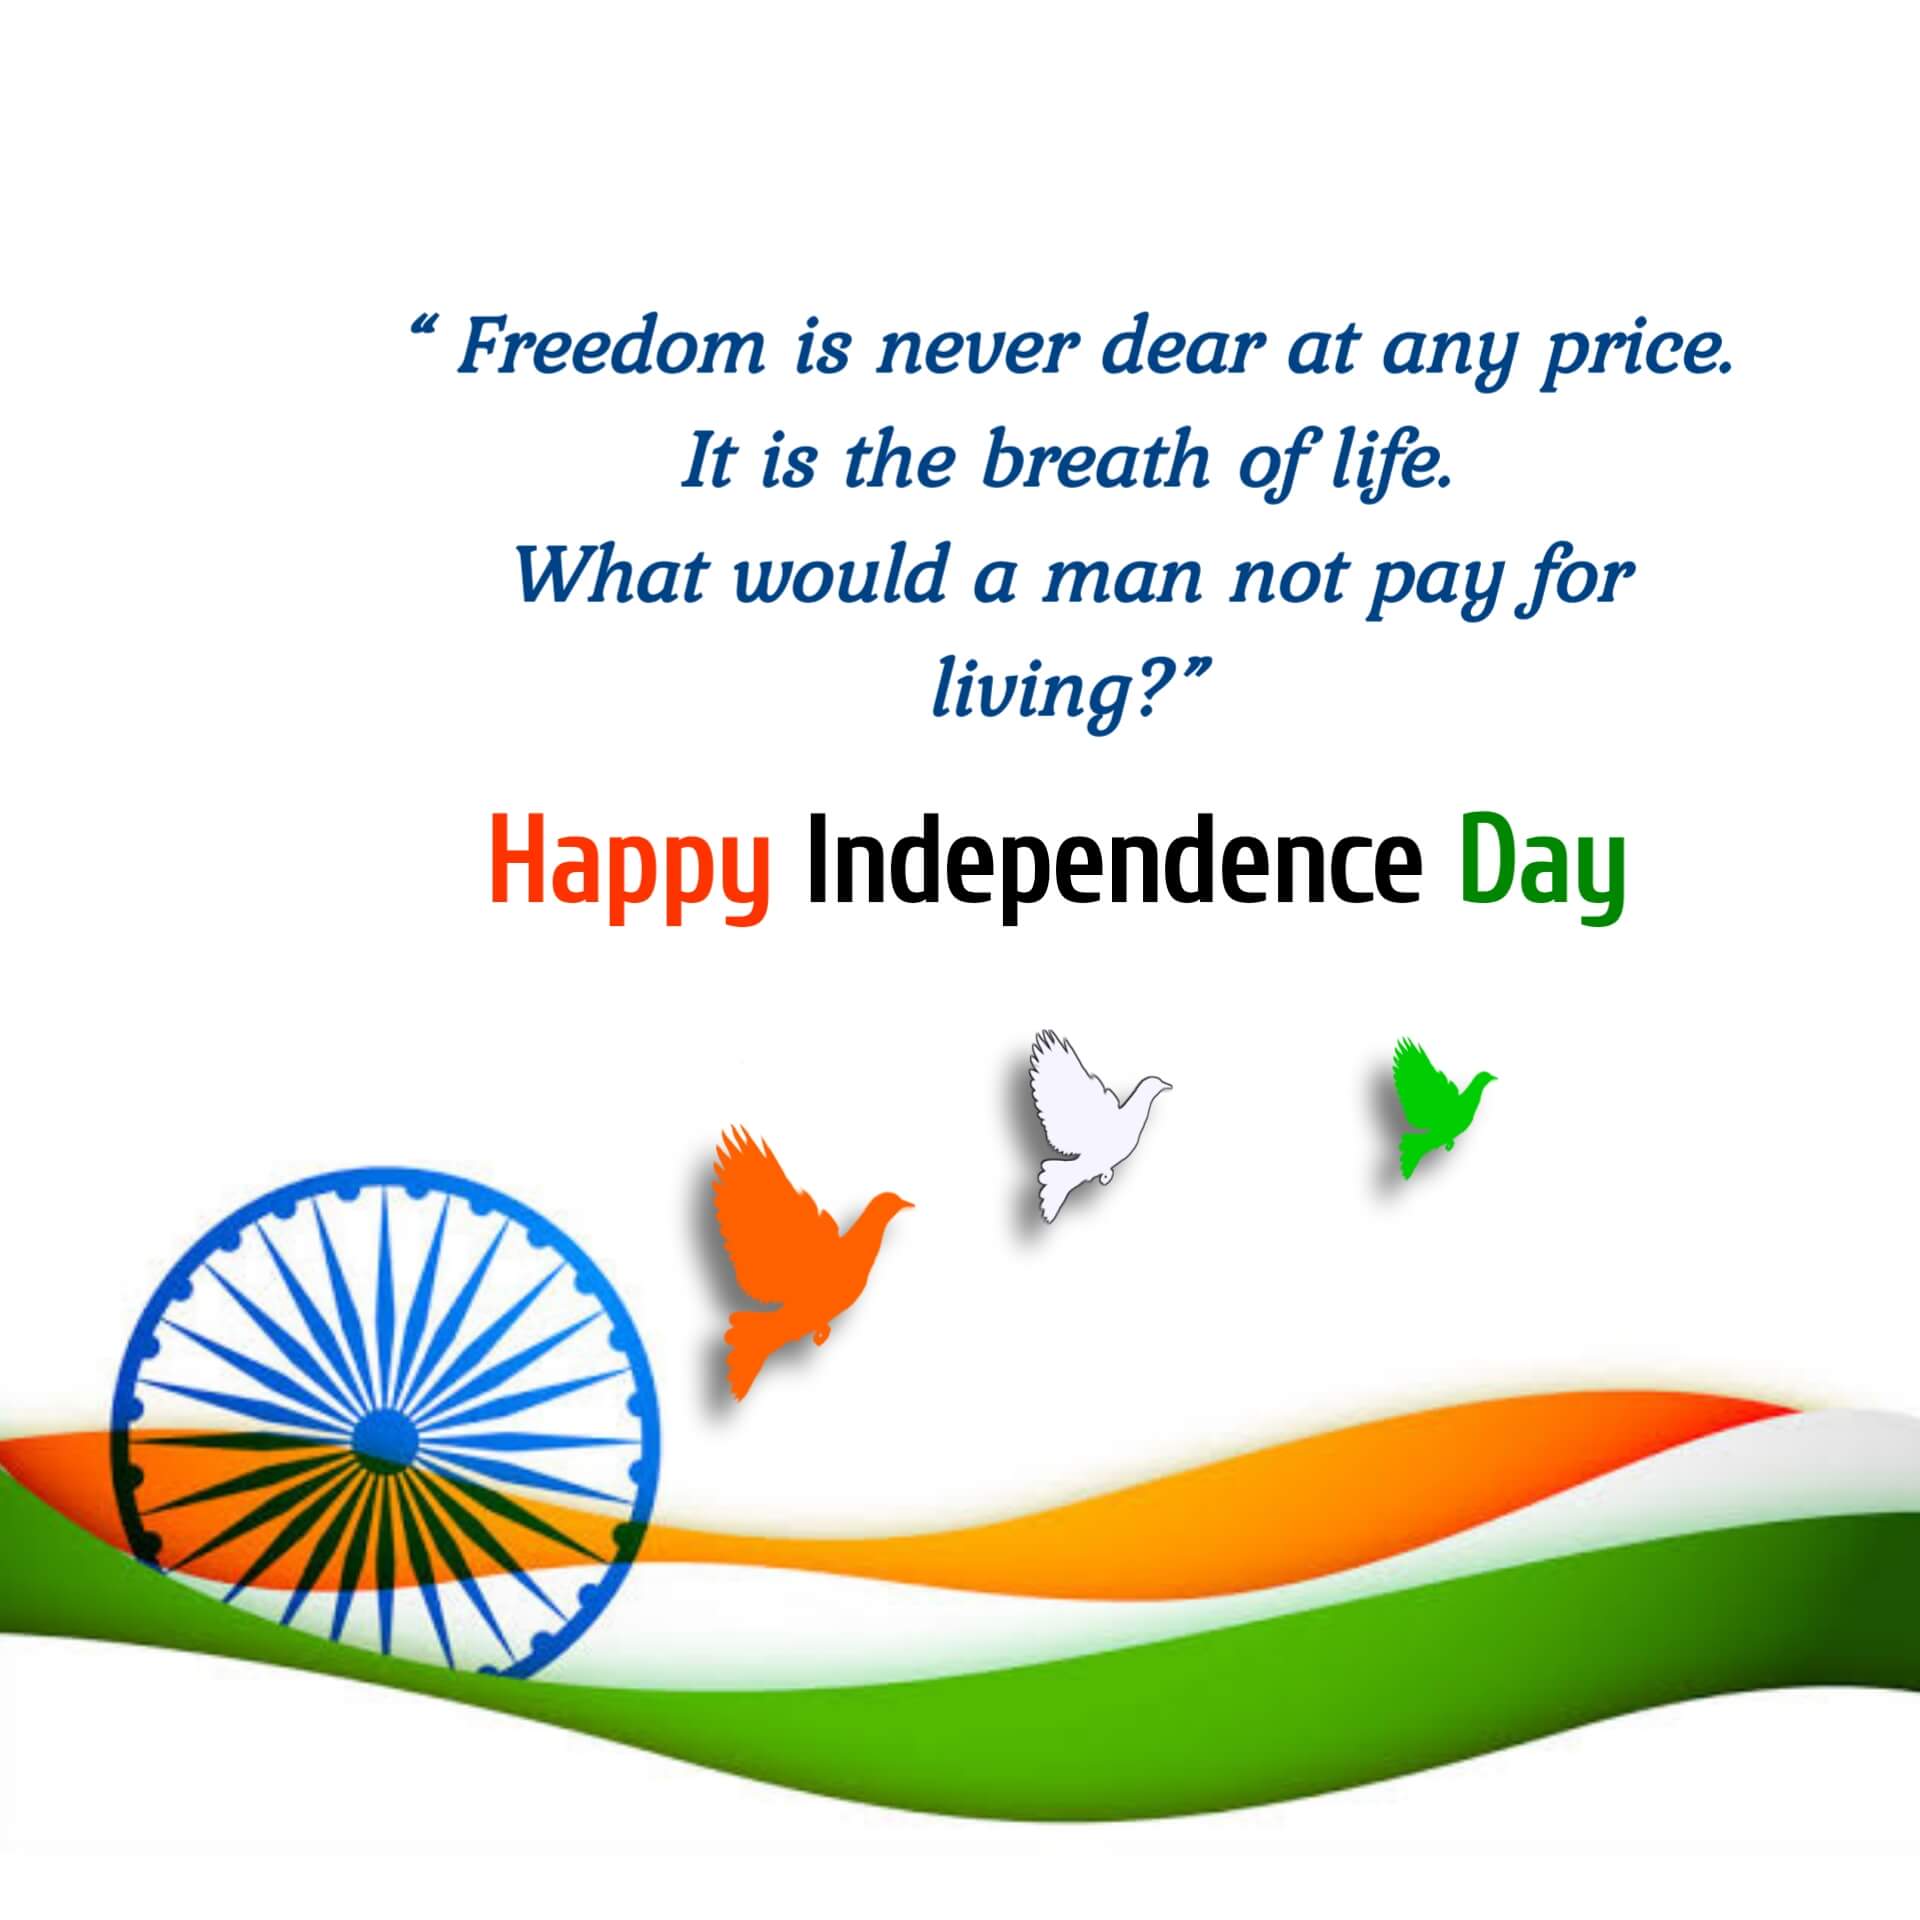 India Independence Day Image with Quotes